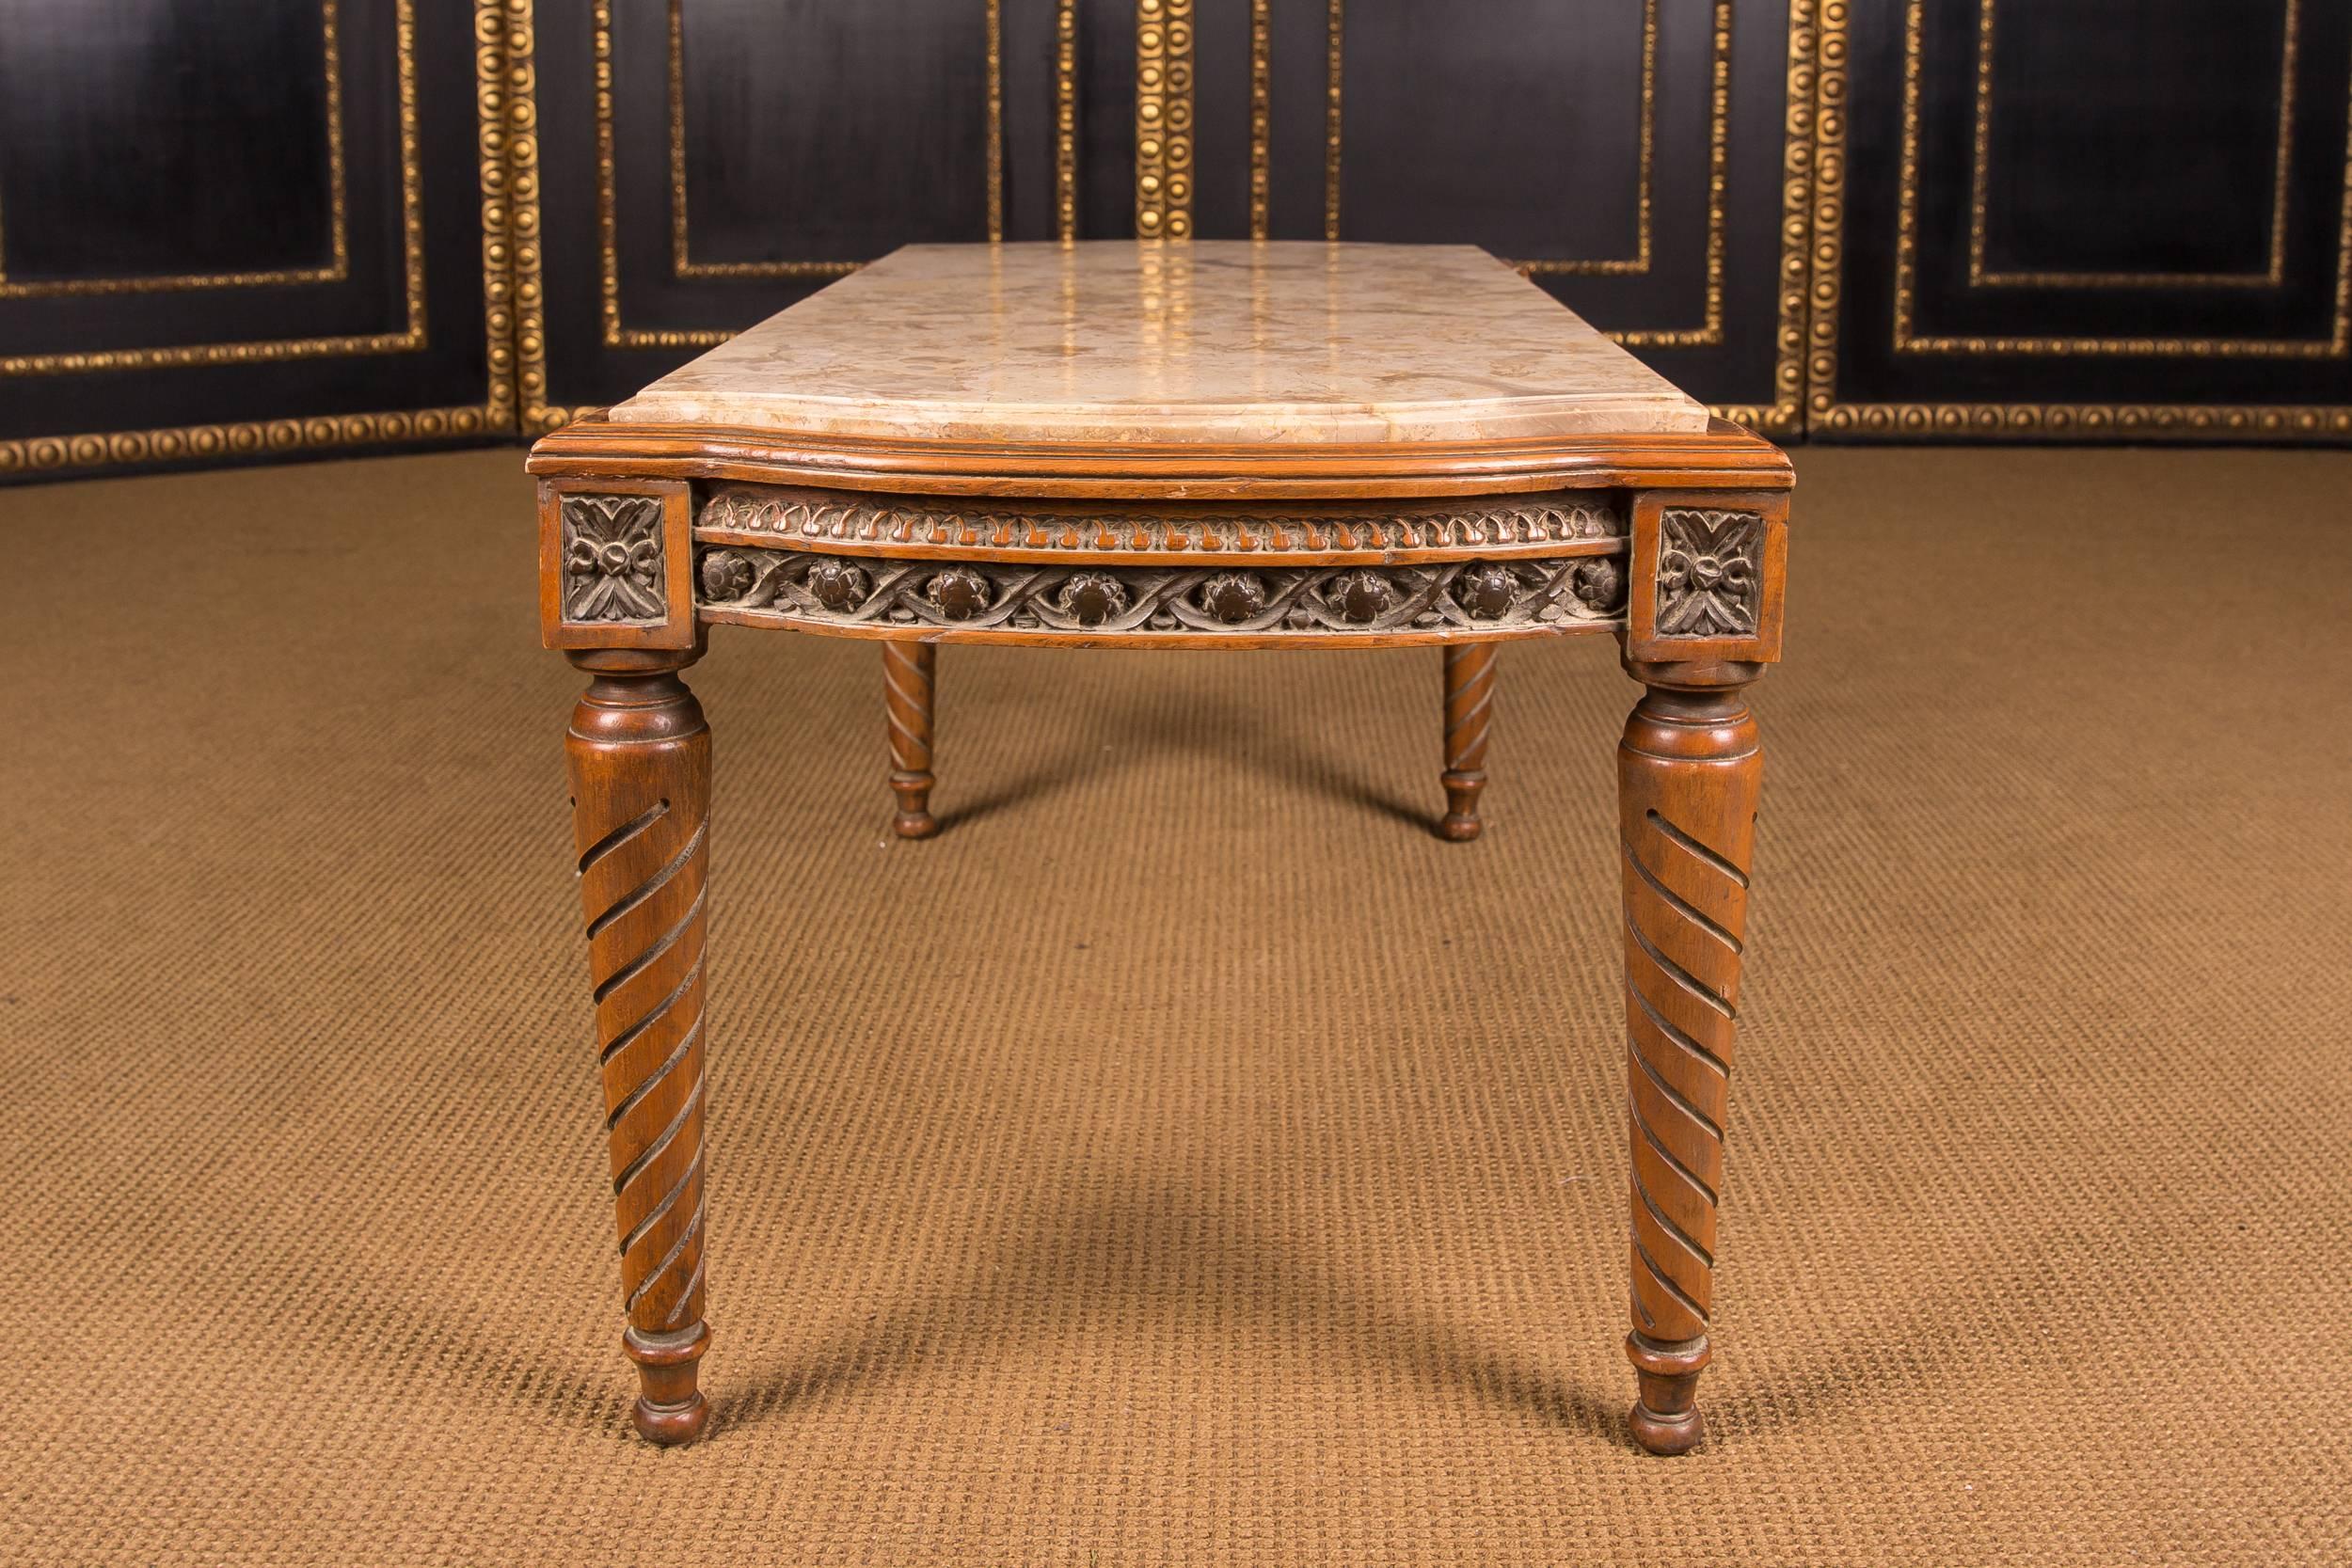 Hand-Carved High Quality Table with Marble Top in Louis Seize Style